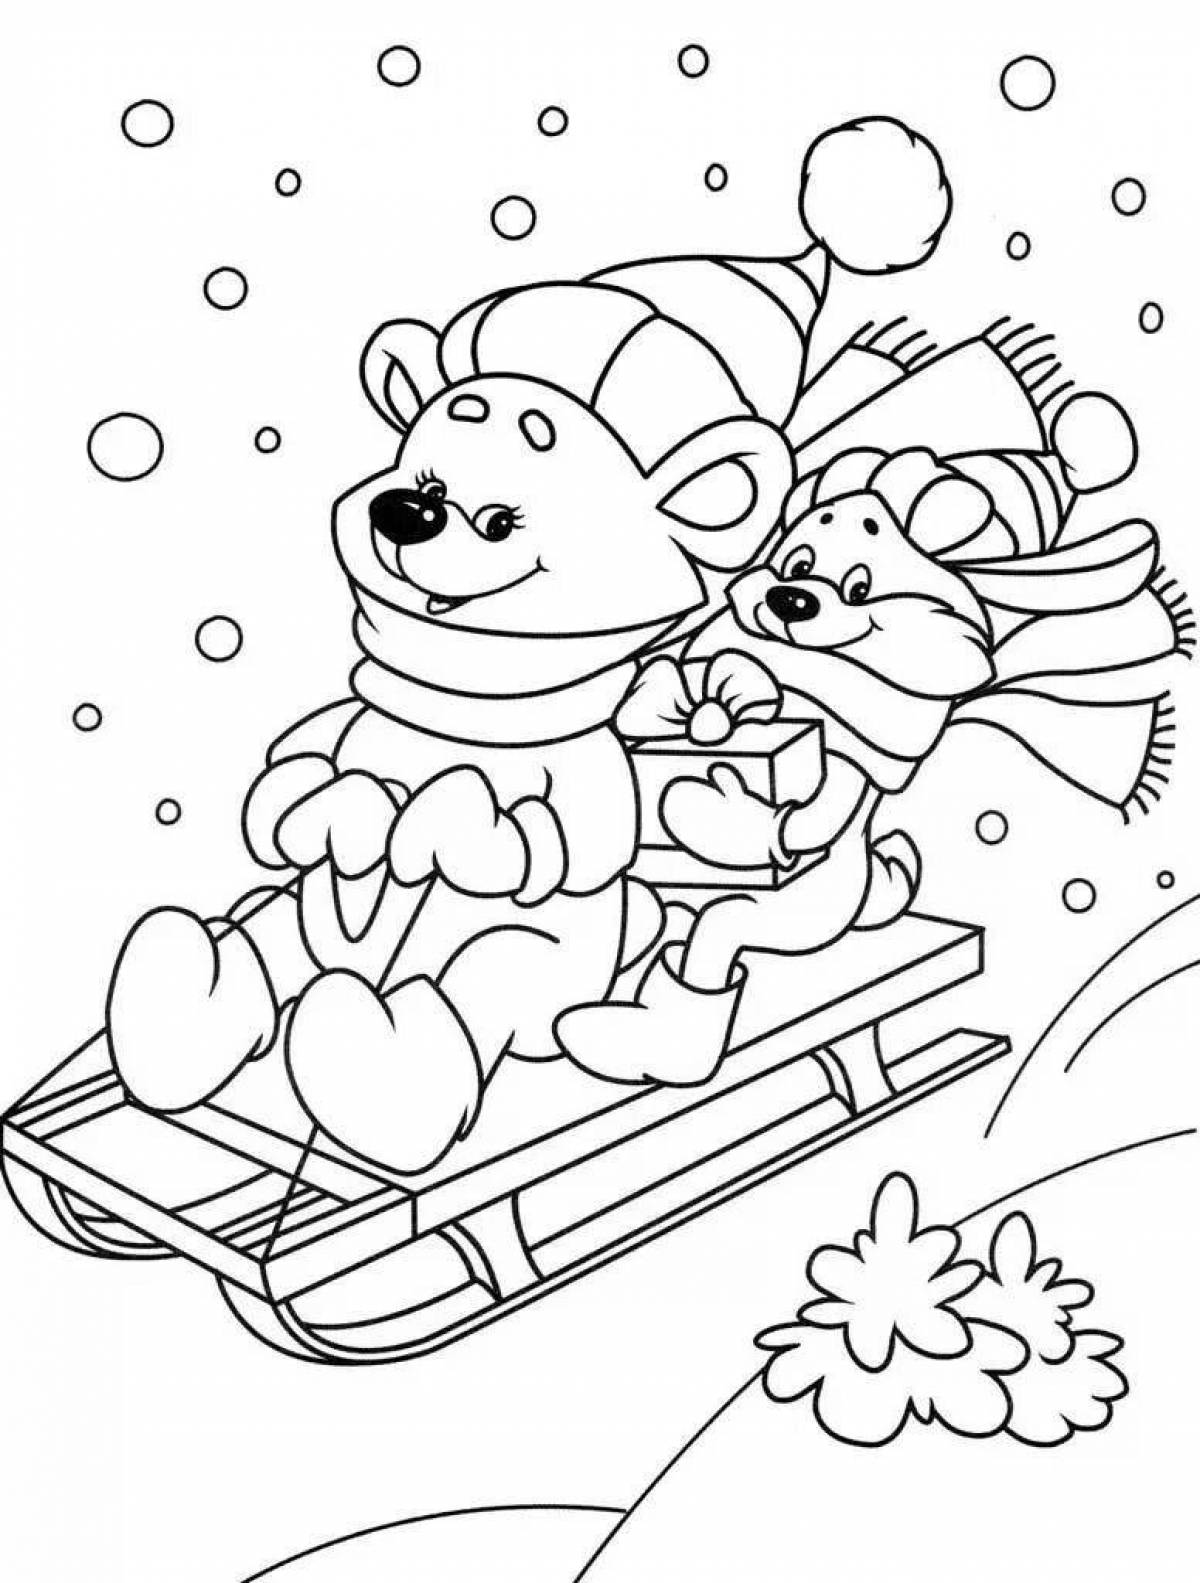 A fascinating coloring book for children 3 years old winter